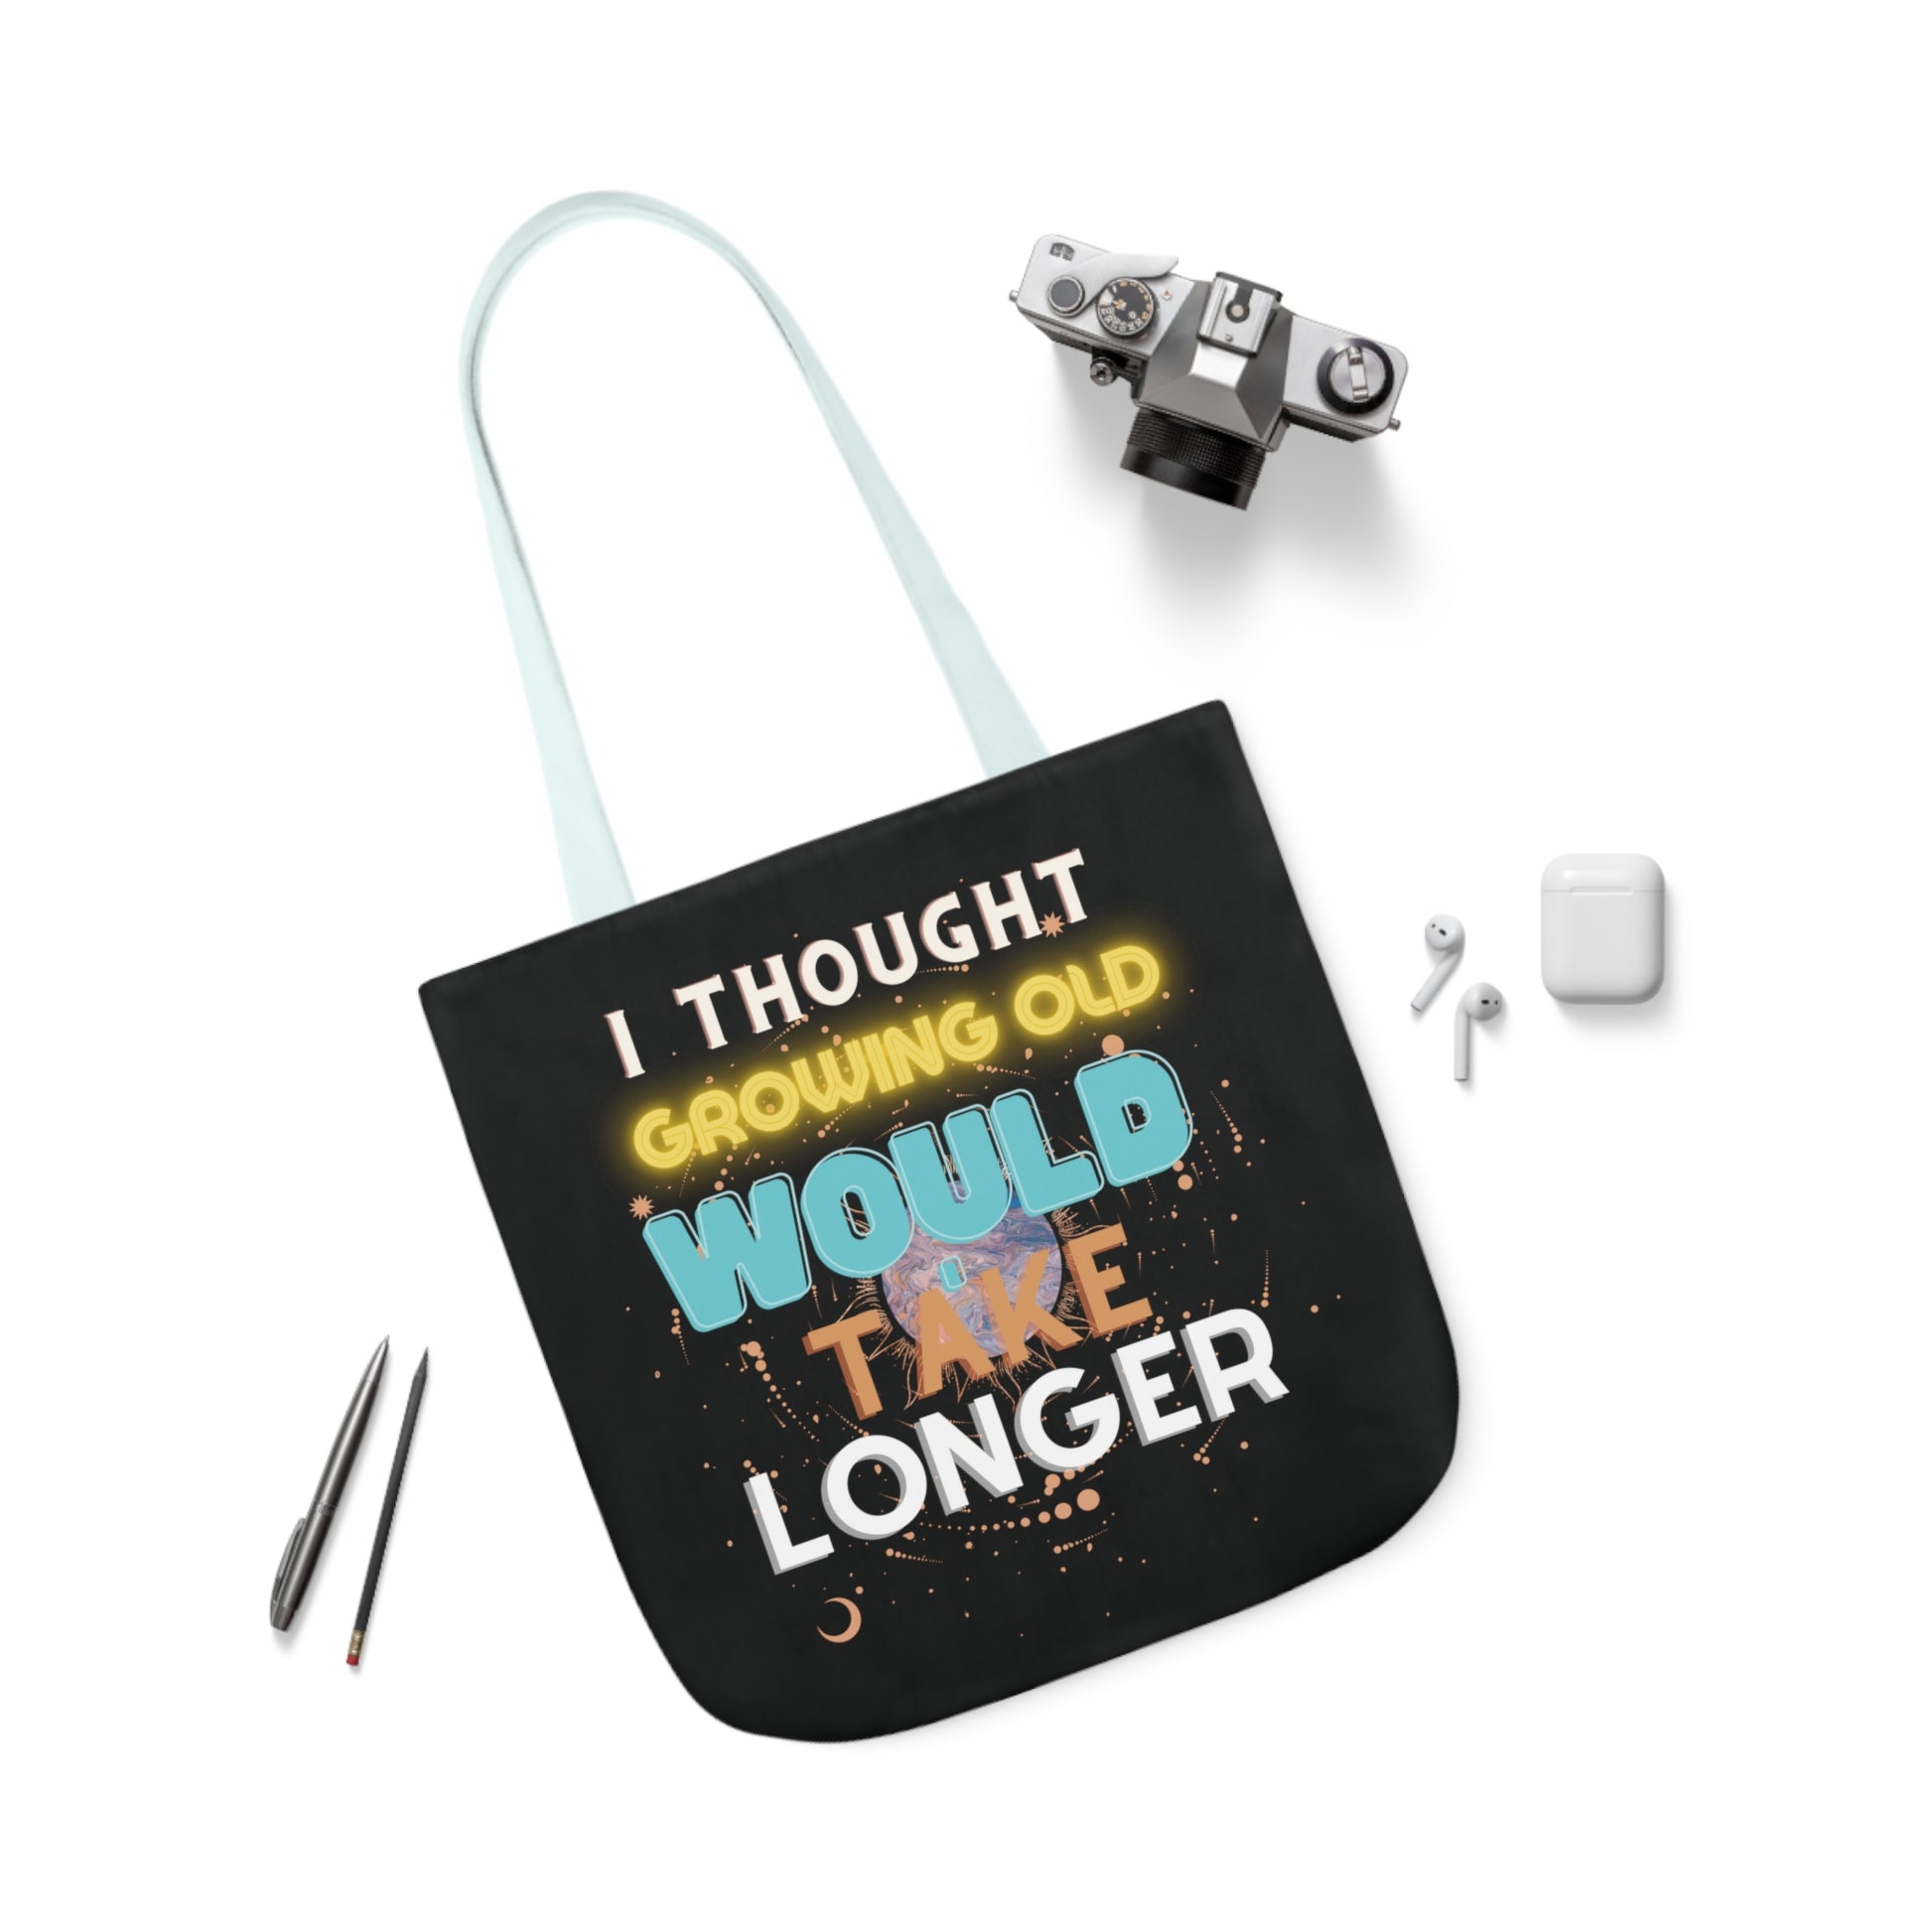 I Thought Growing Old Would Take Longer Tote Bag - Adulting Tote Bag - Growing Old Tote Accessories   